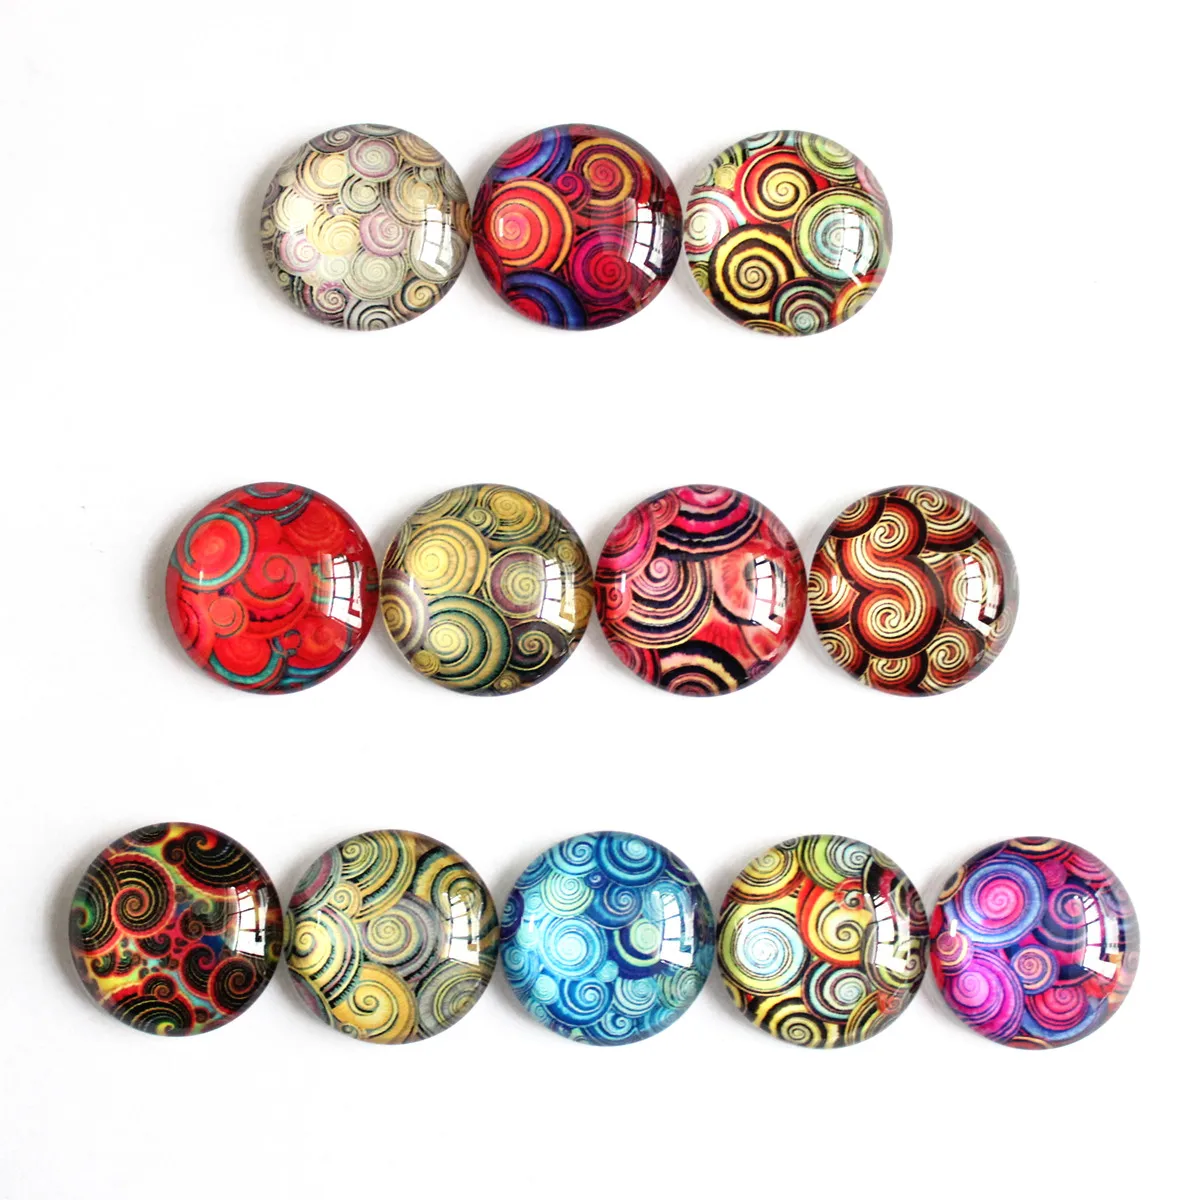 

From 8mm to 30mm Random Mixed Round Spiral Flowers Eyes Cabochons Pattern Glass Flatback Photo Base DIY Making Accessories Pair